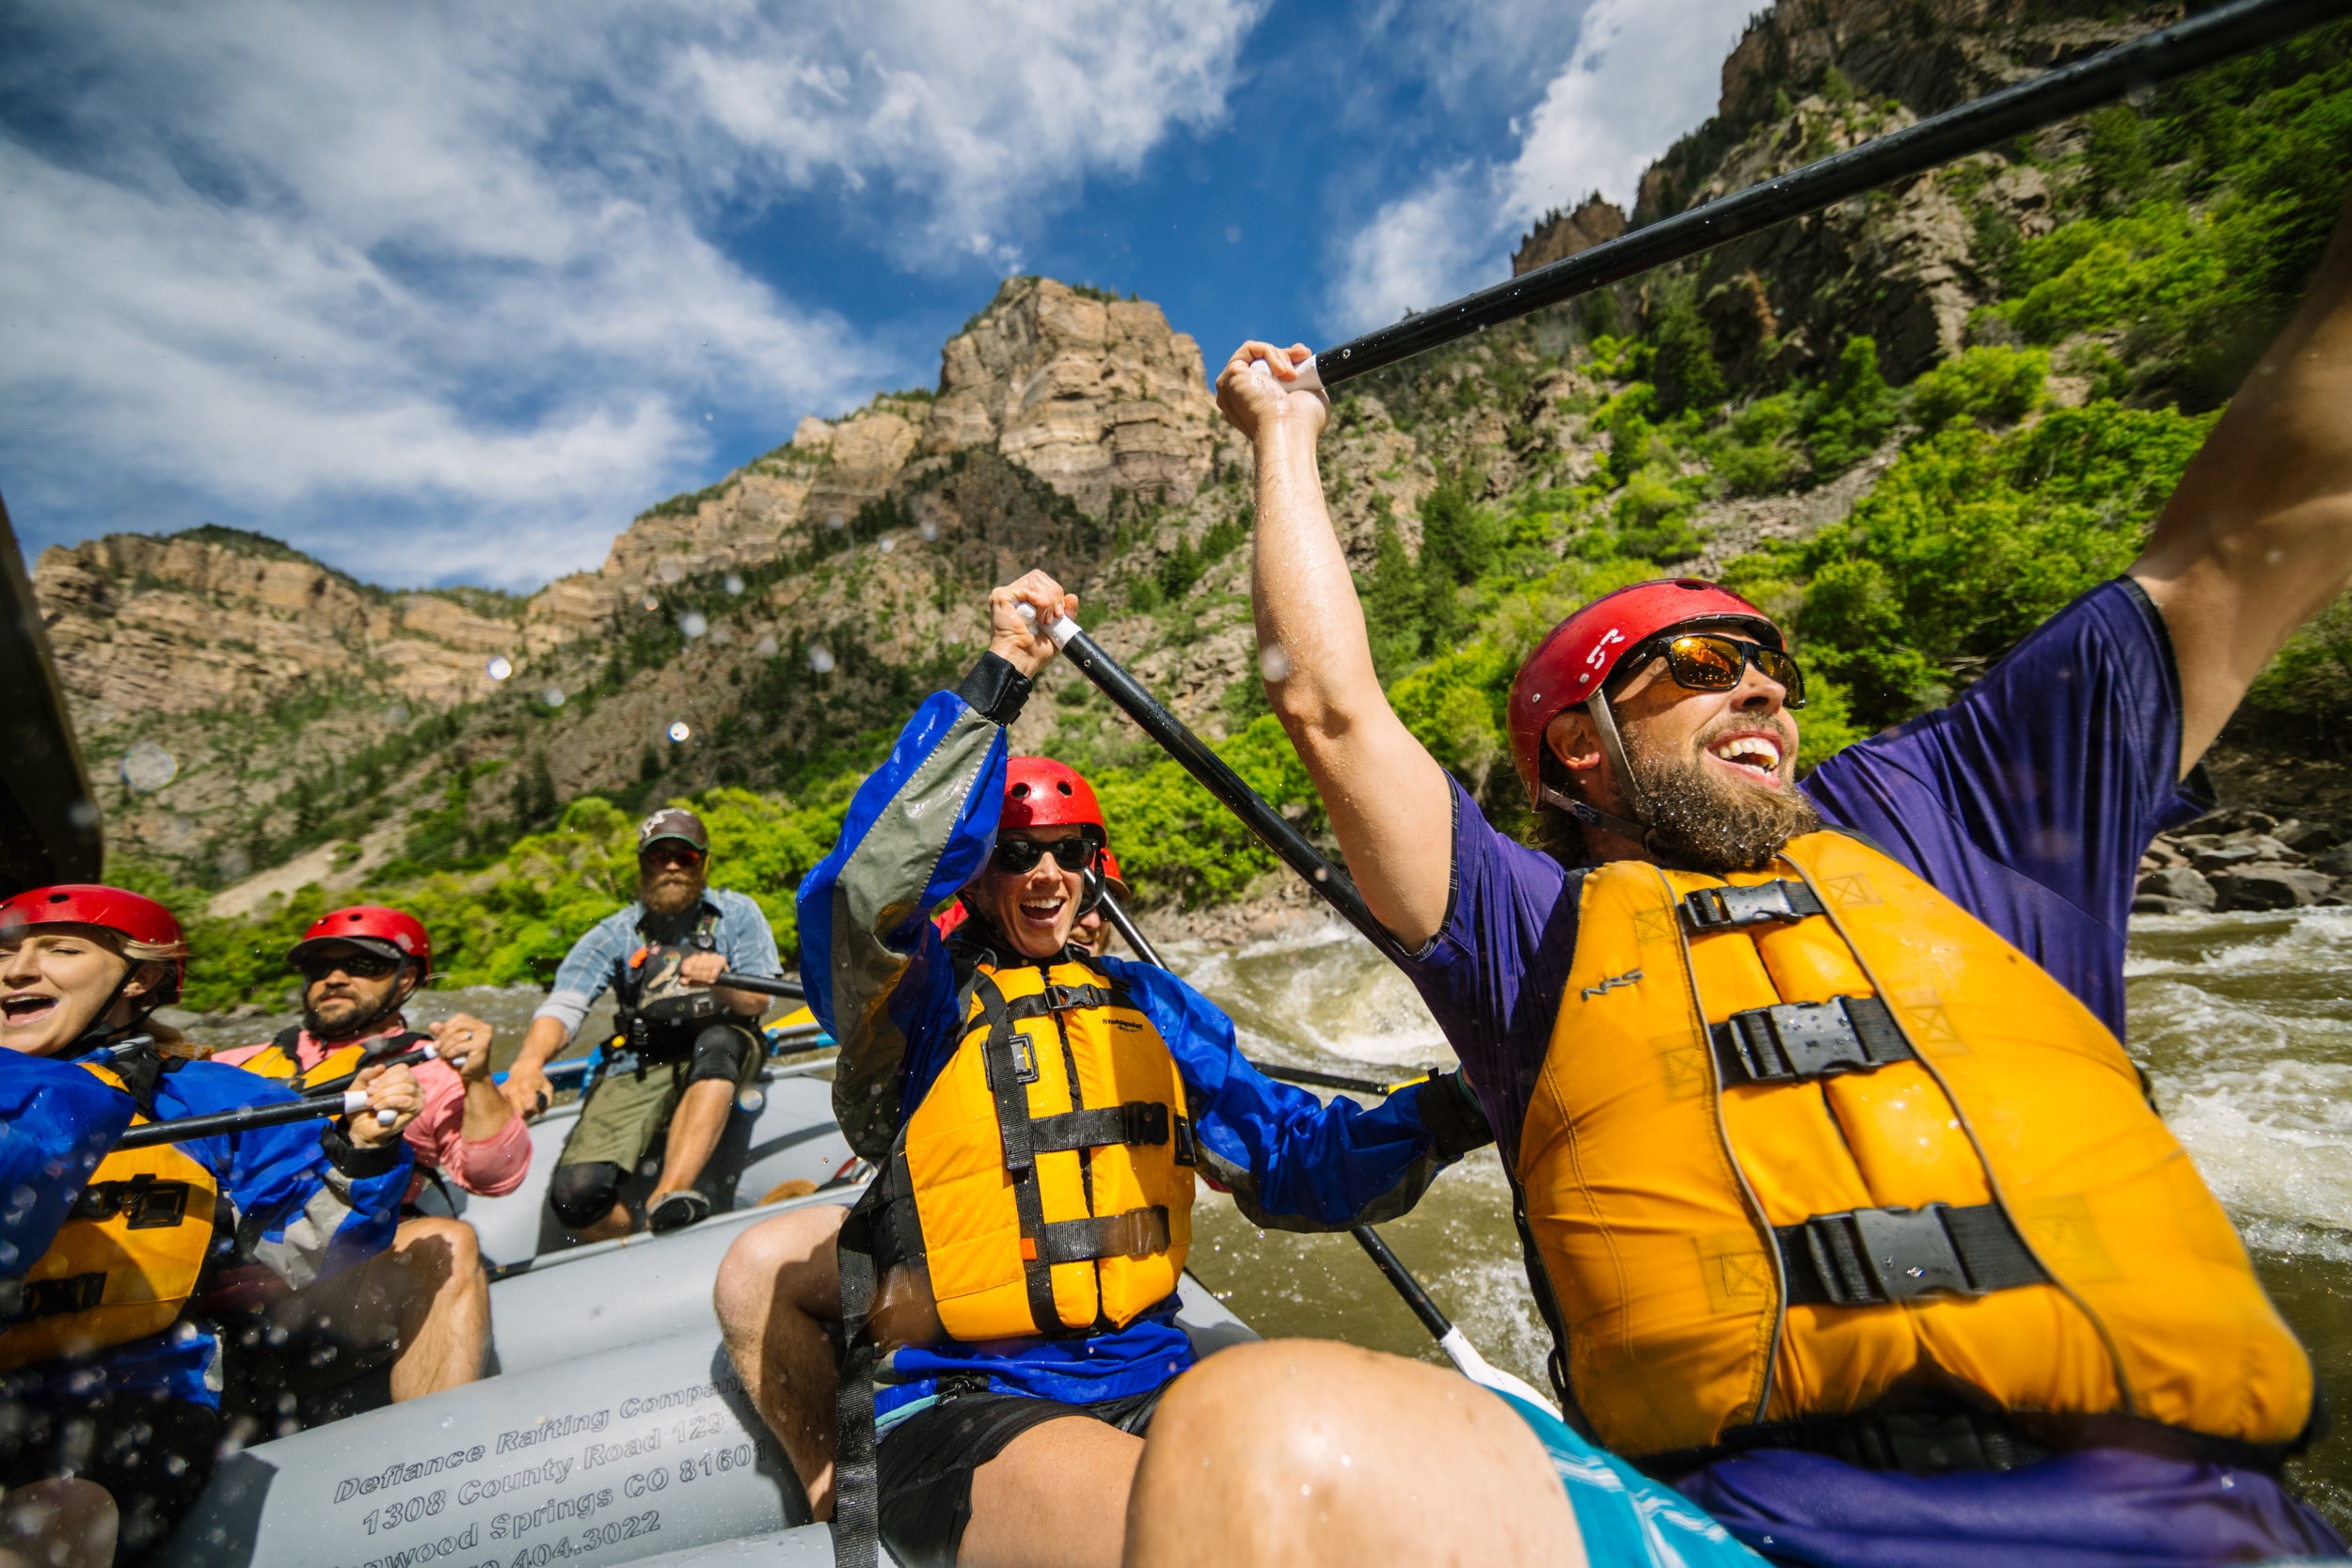 a colorado whitewater rafting group celebrates after going over a rapid.